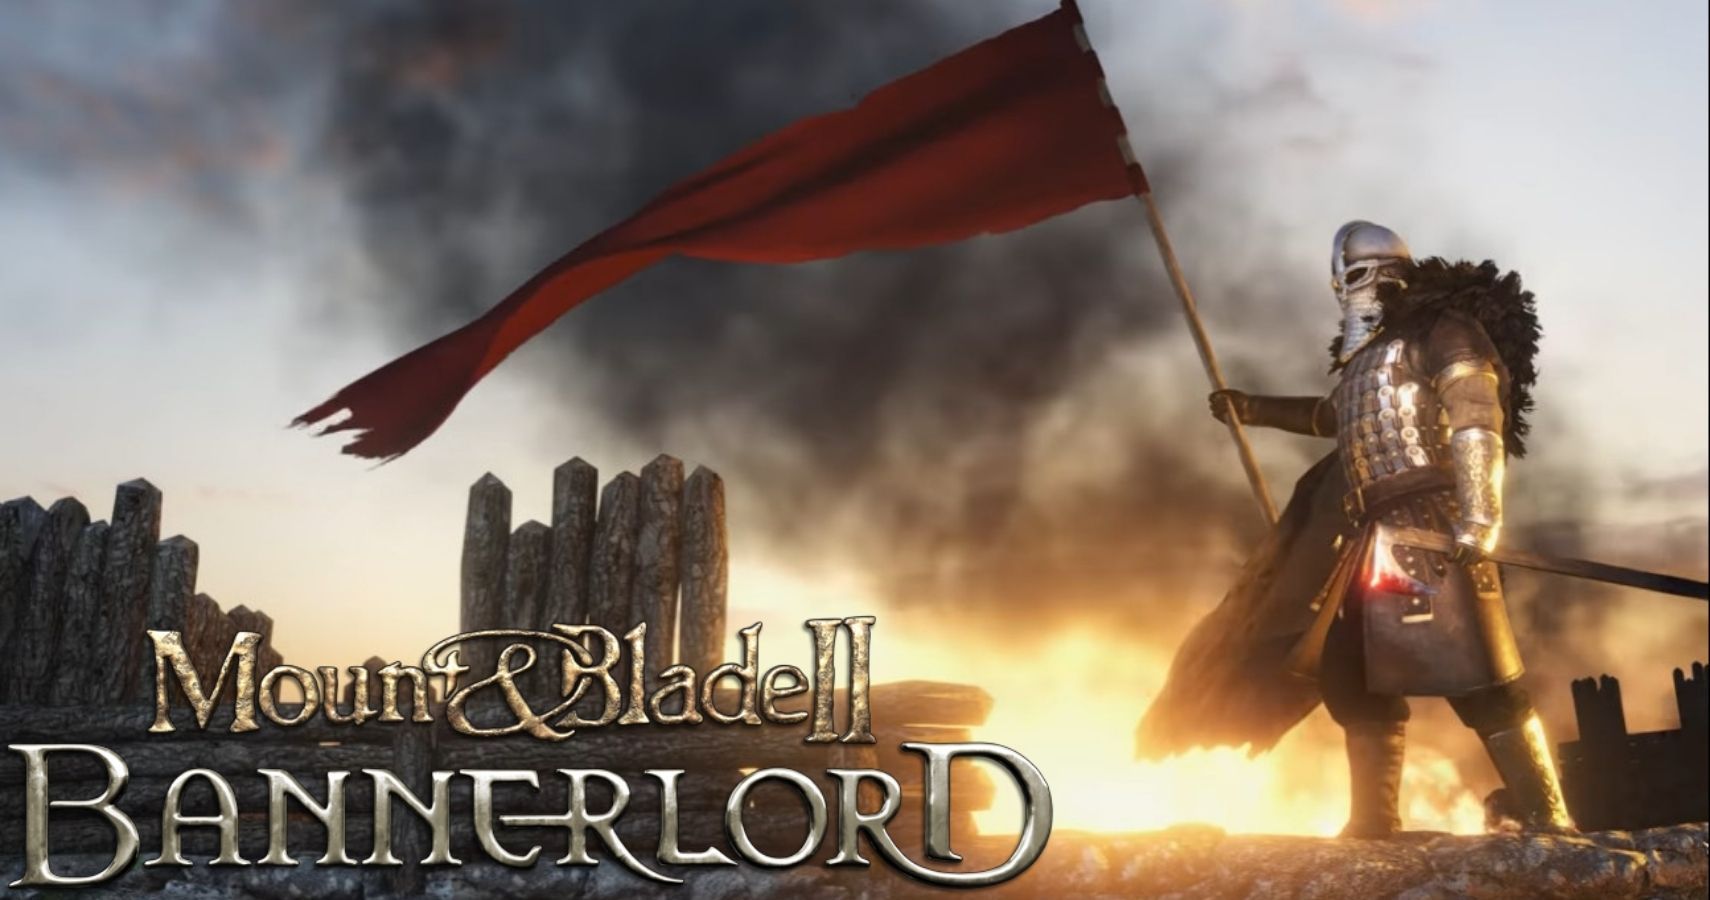 Mount & Blade II Bannorlord Dev Update 7 feature image